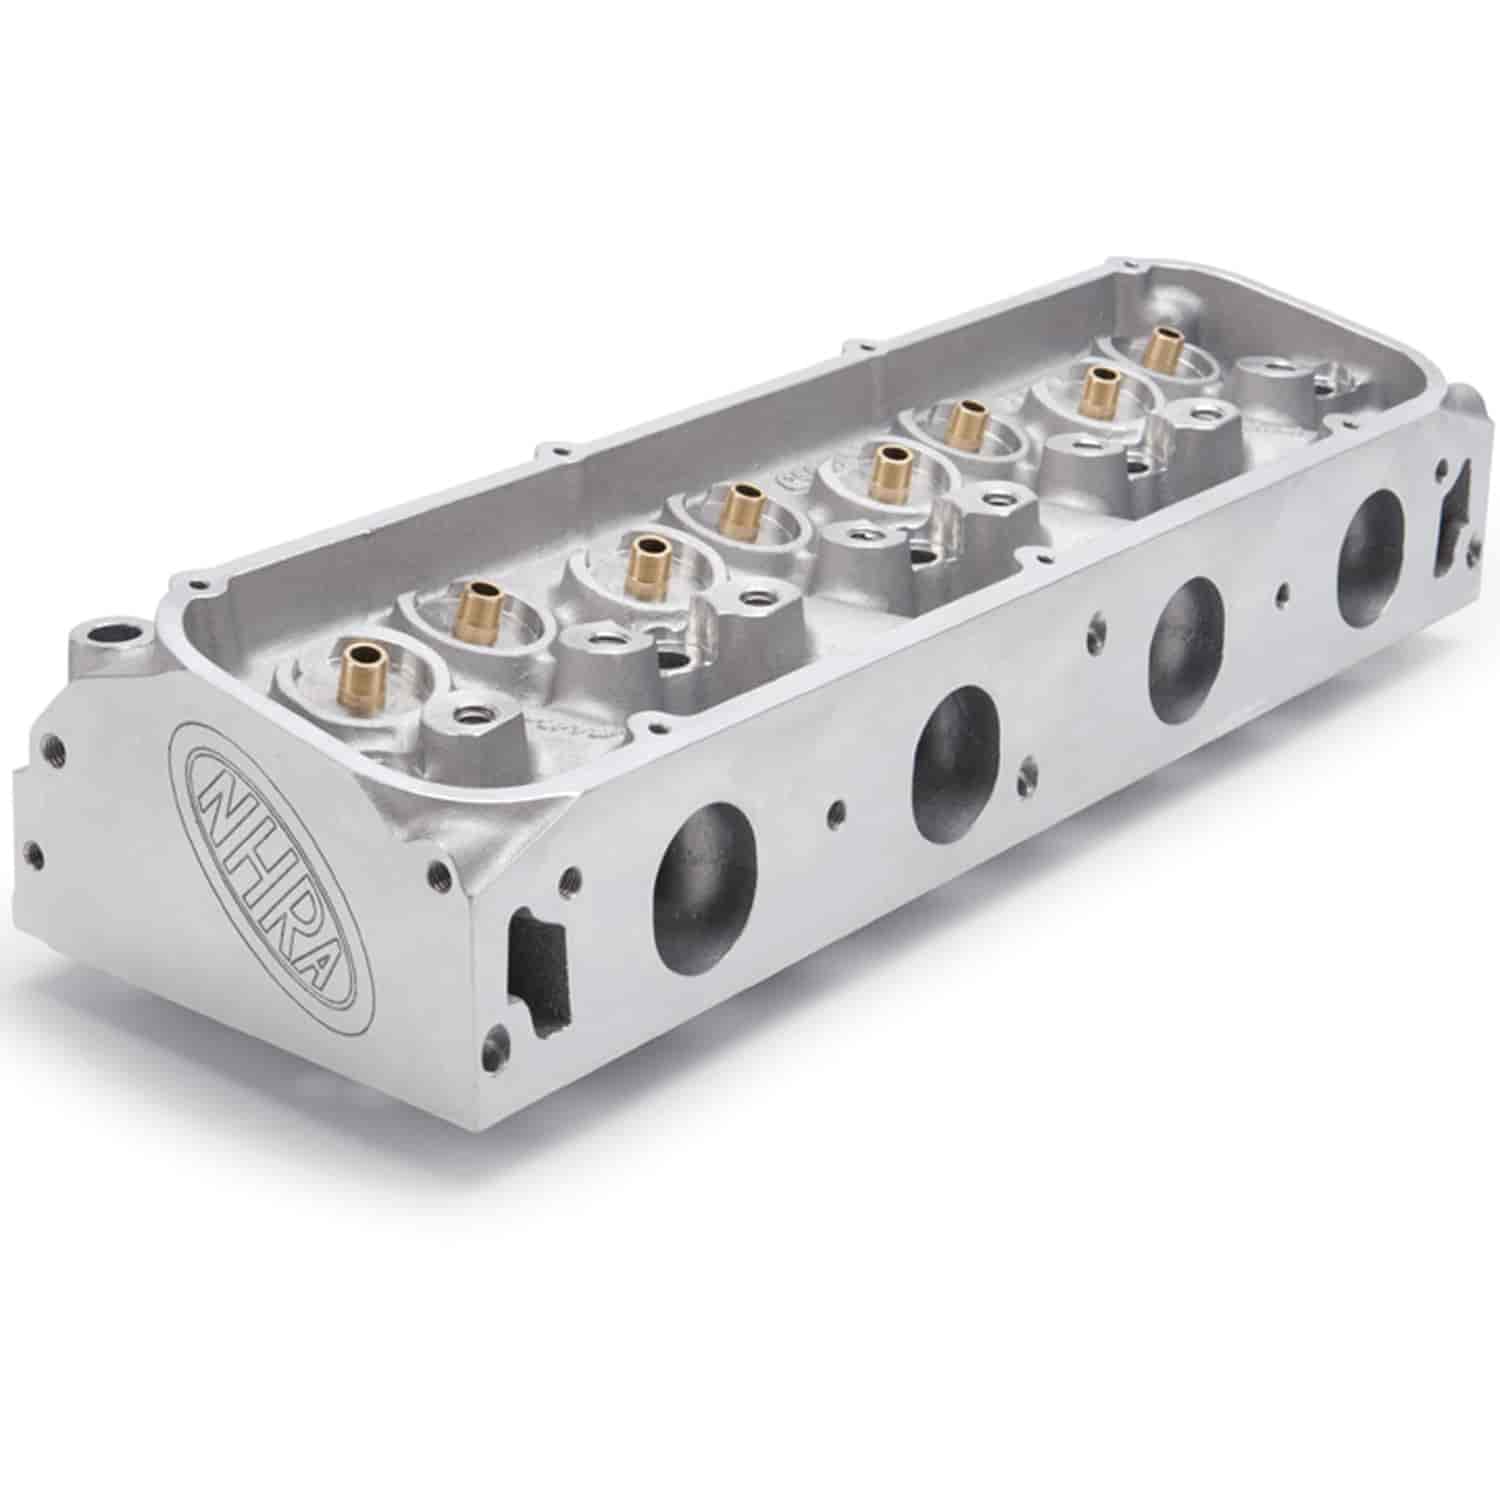 NHRA Performer RPM Cylinder Head for Big Block Ford